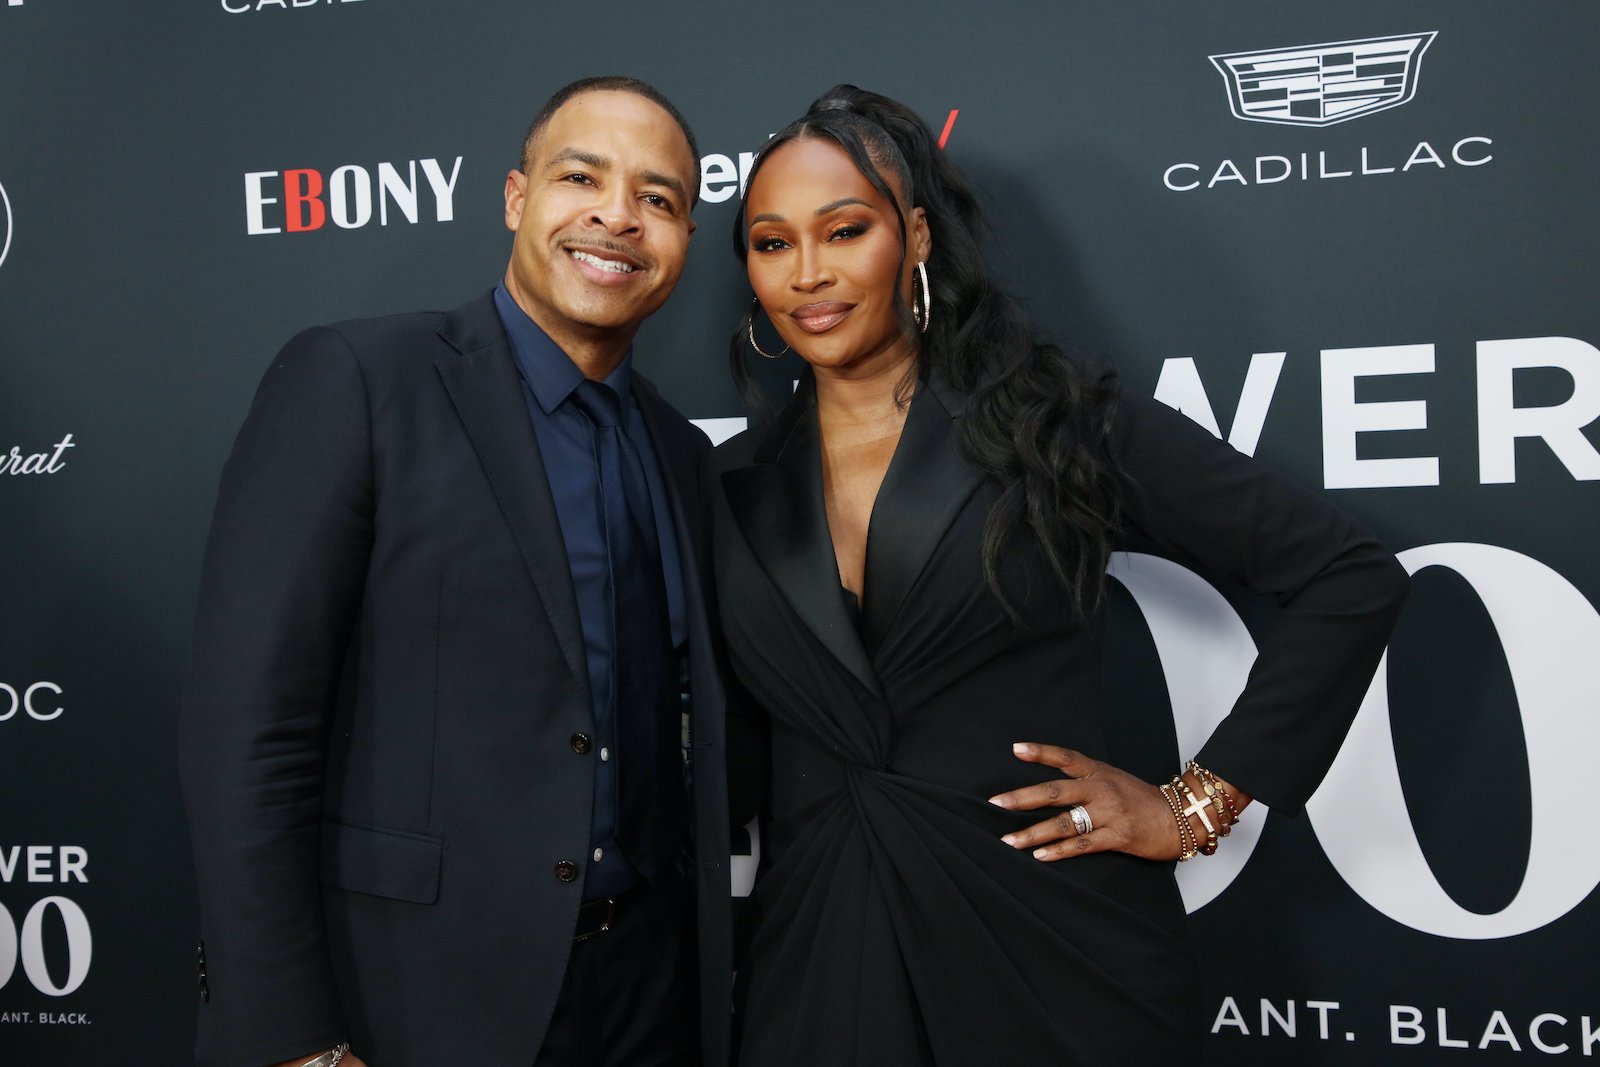 Mike Hill said his wife Cynthia Bailey didn't need RHOA to remain relevant. 